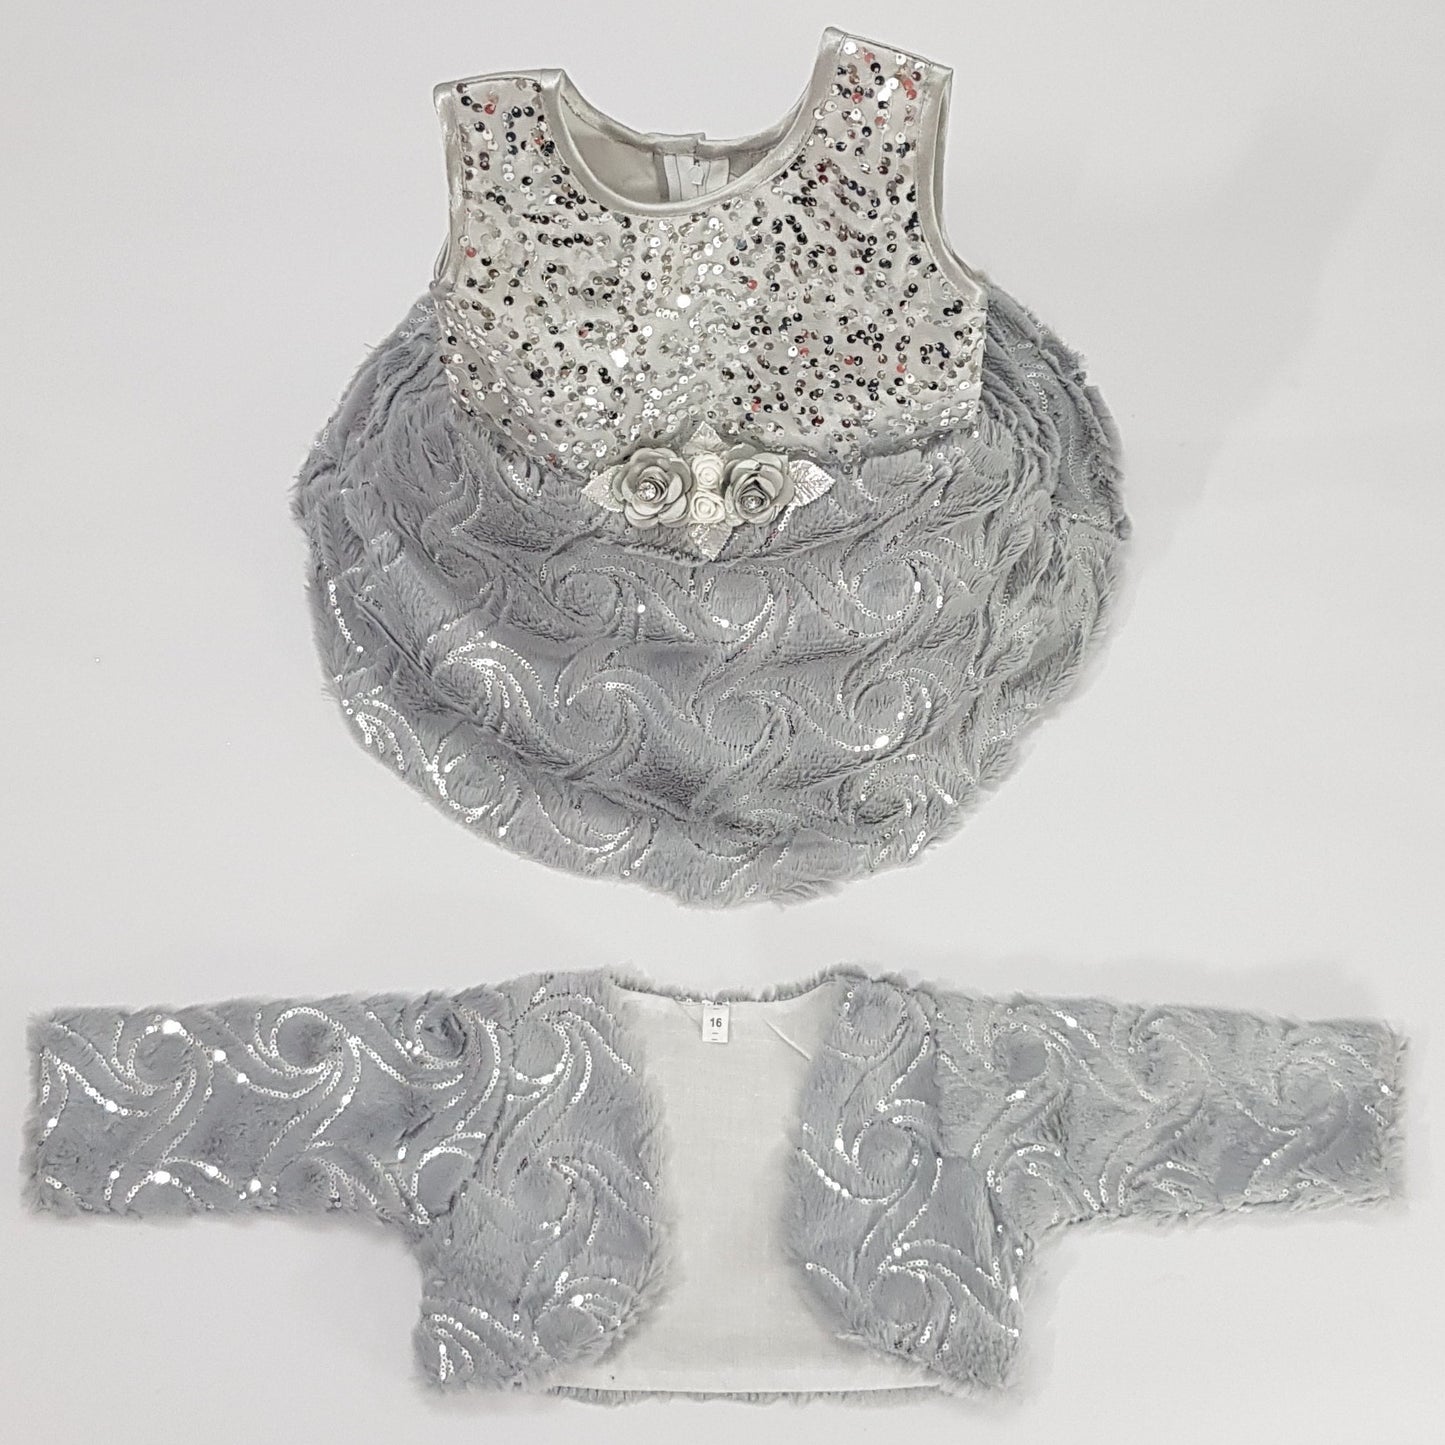 Beautiful Light Grey, Silver Birthday Party Dress With Jacket